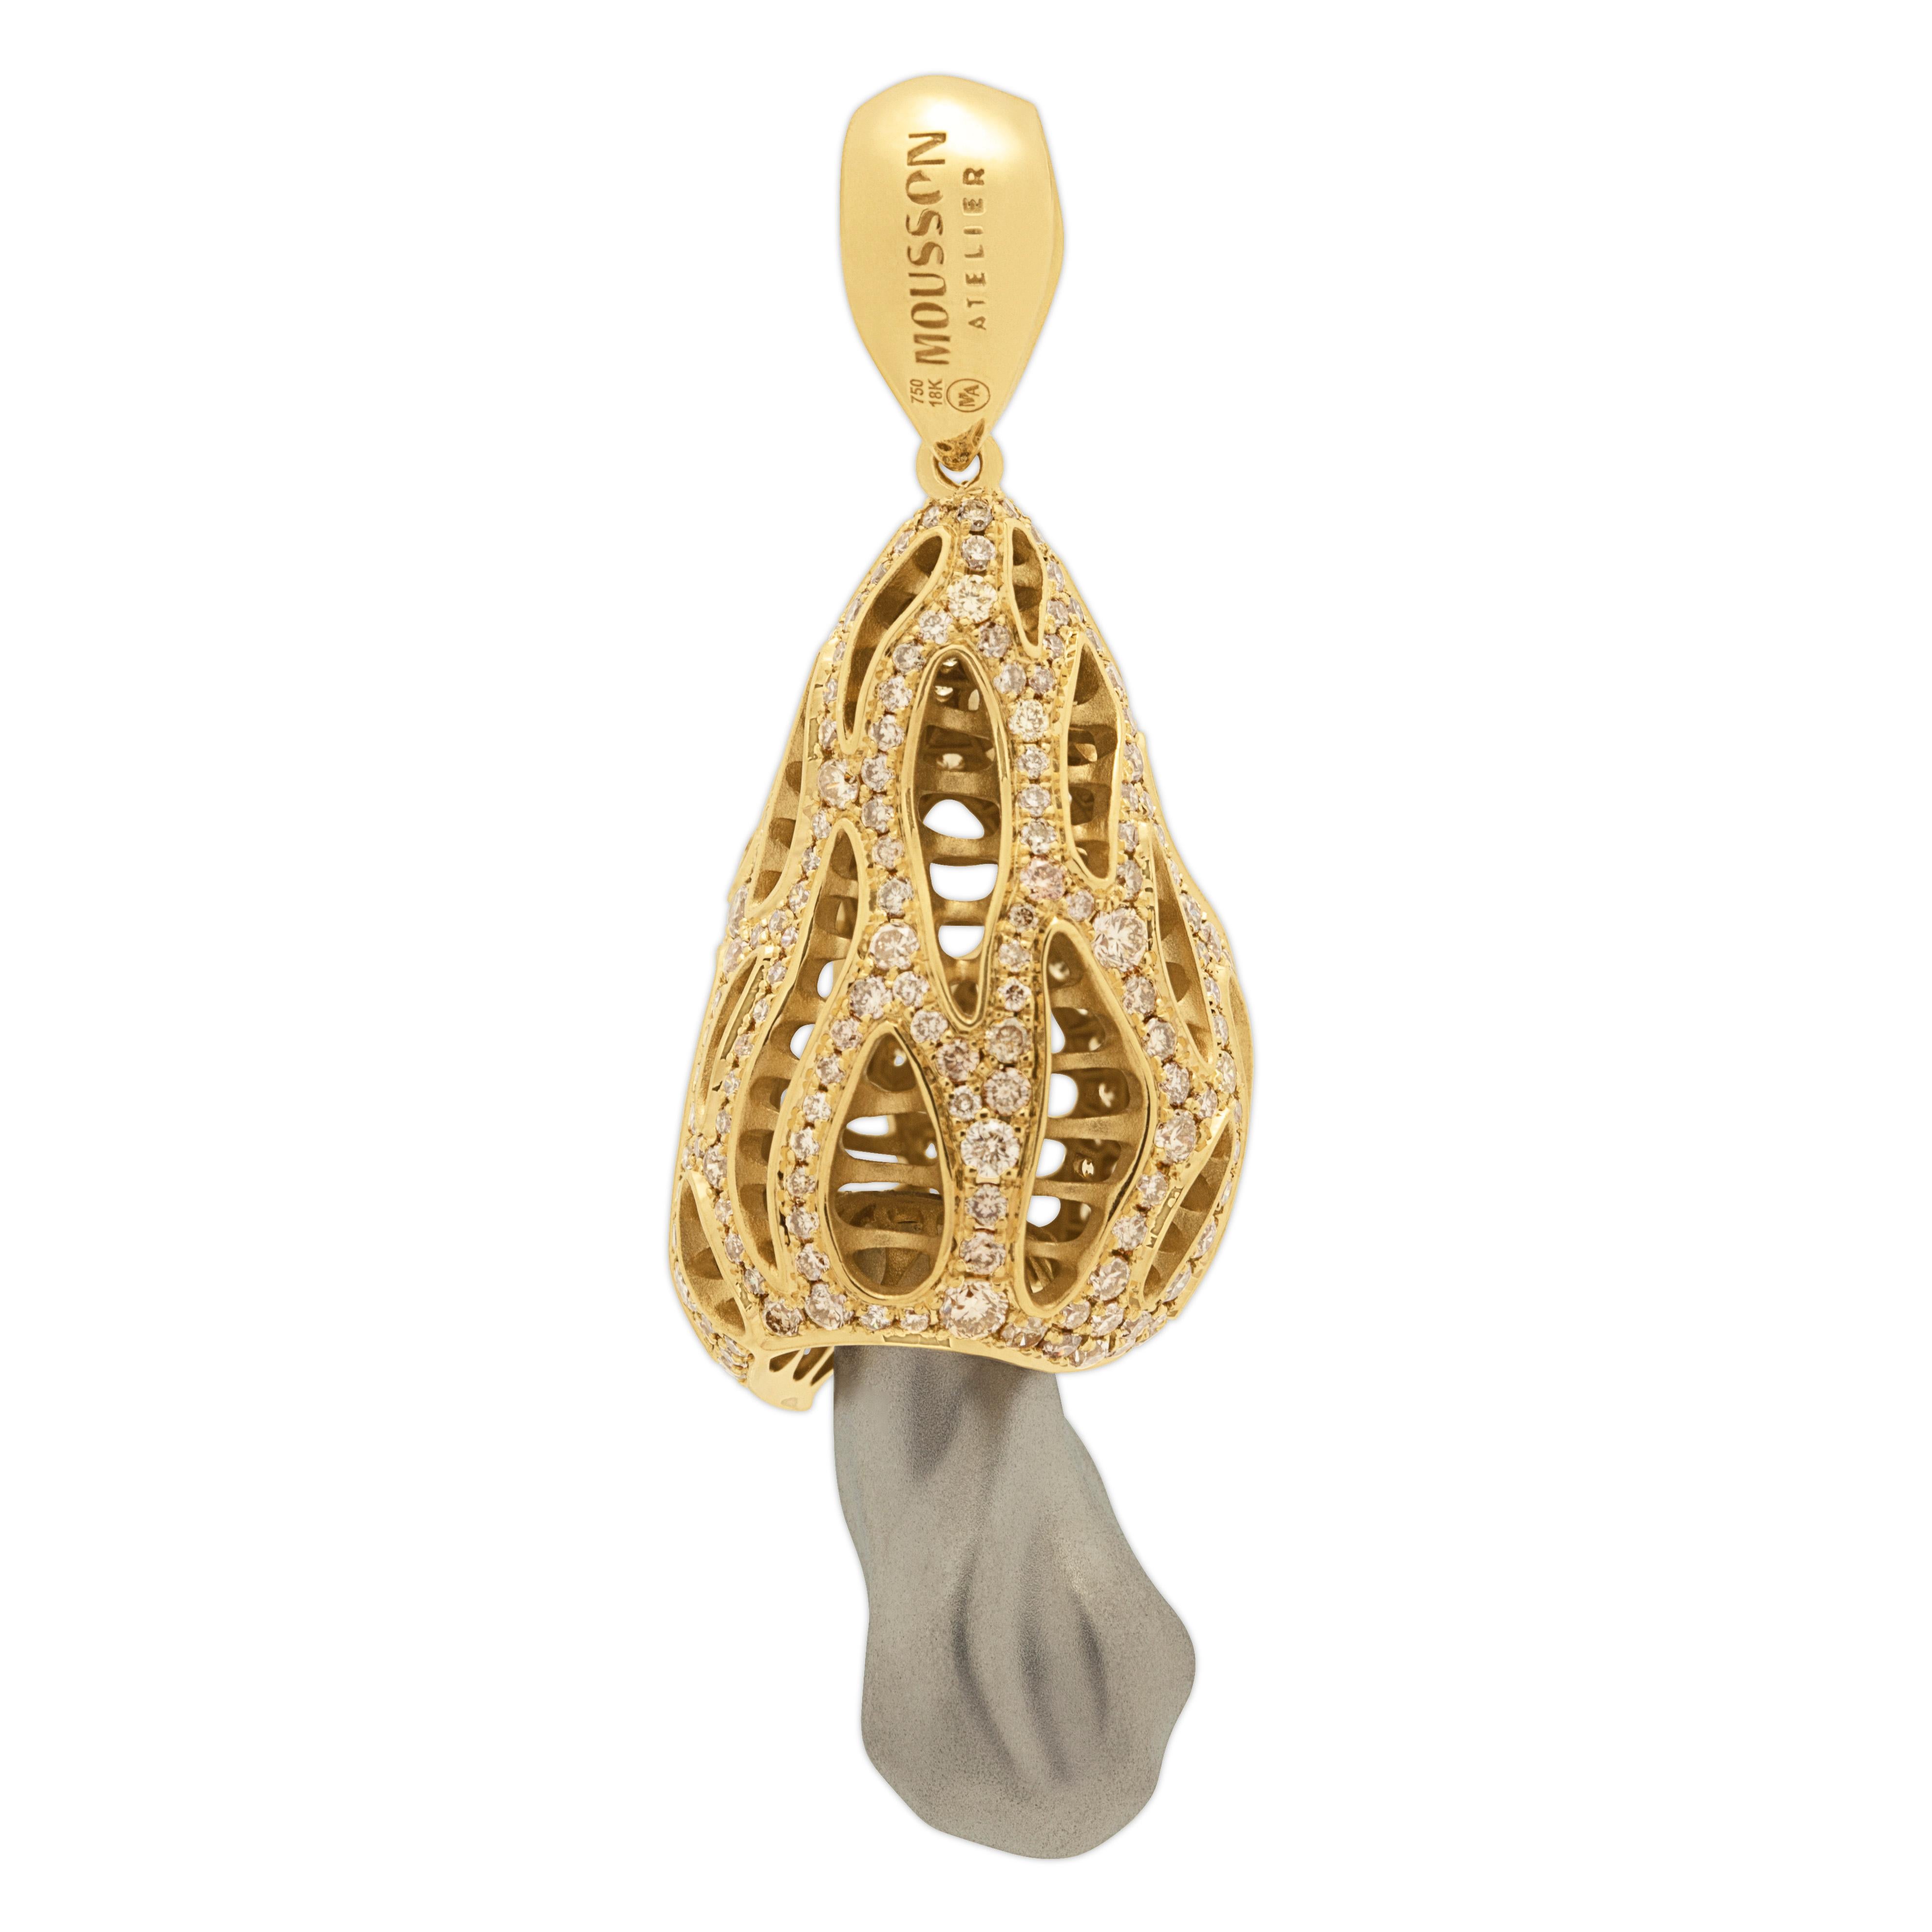 Champagne Diamonds 18 Karat Yellow Gold Mushroom Pendant
We present to your attention a Pendant from our Treasure Forest Collection in the form of a mushroom. Yellow 18 Karat Gold Pendant has an abnormal deeply cracked shape, which was created,